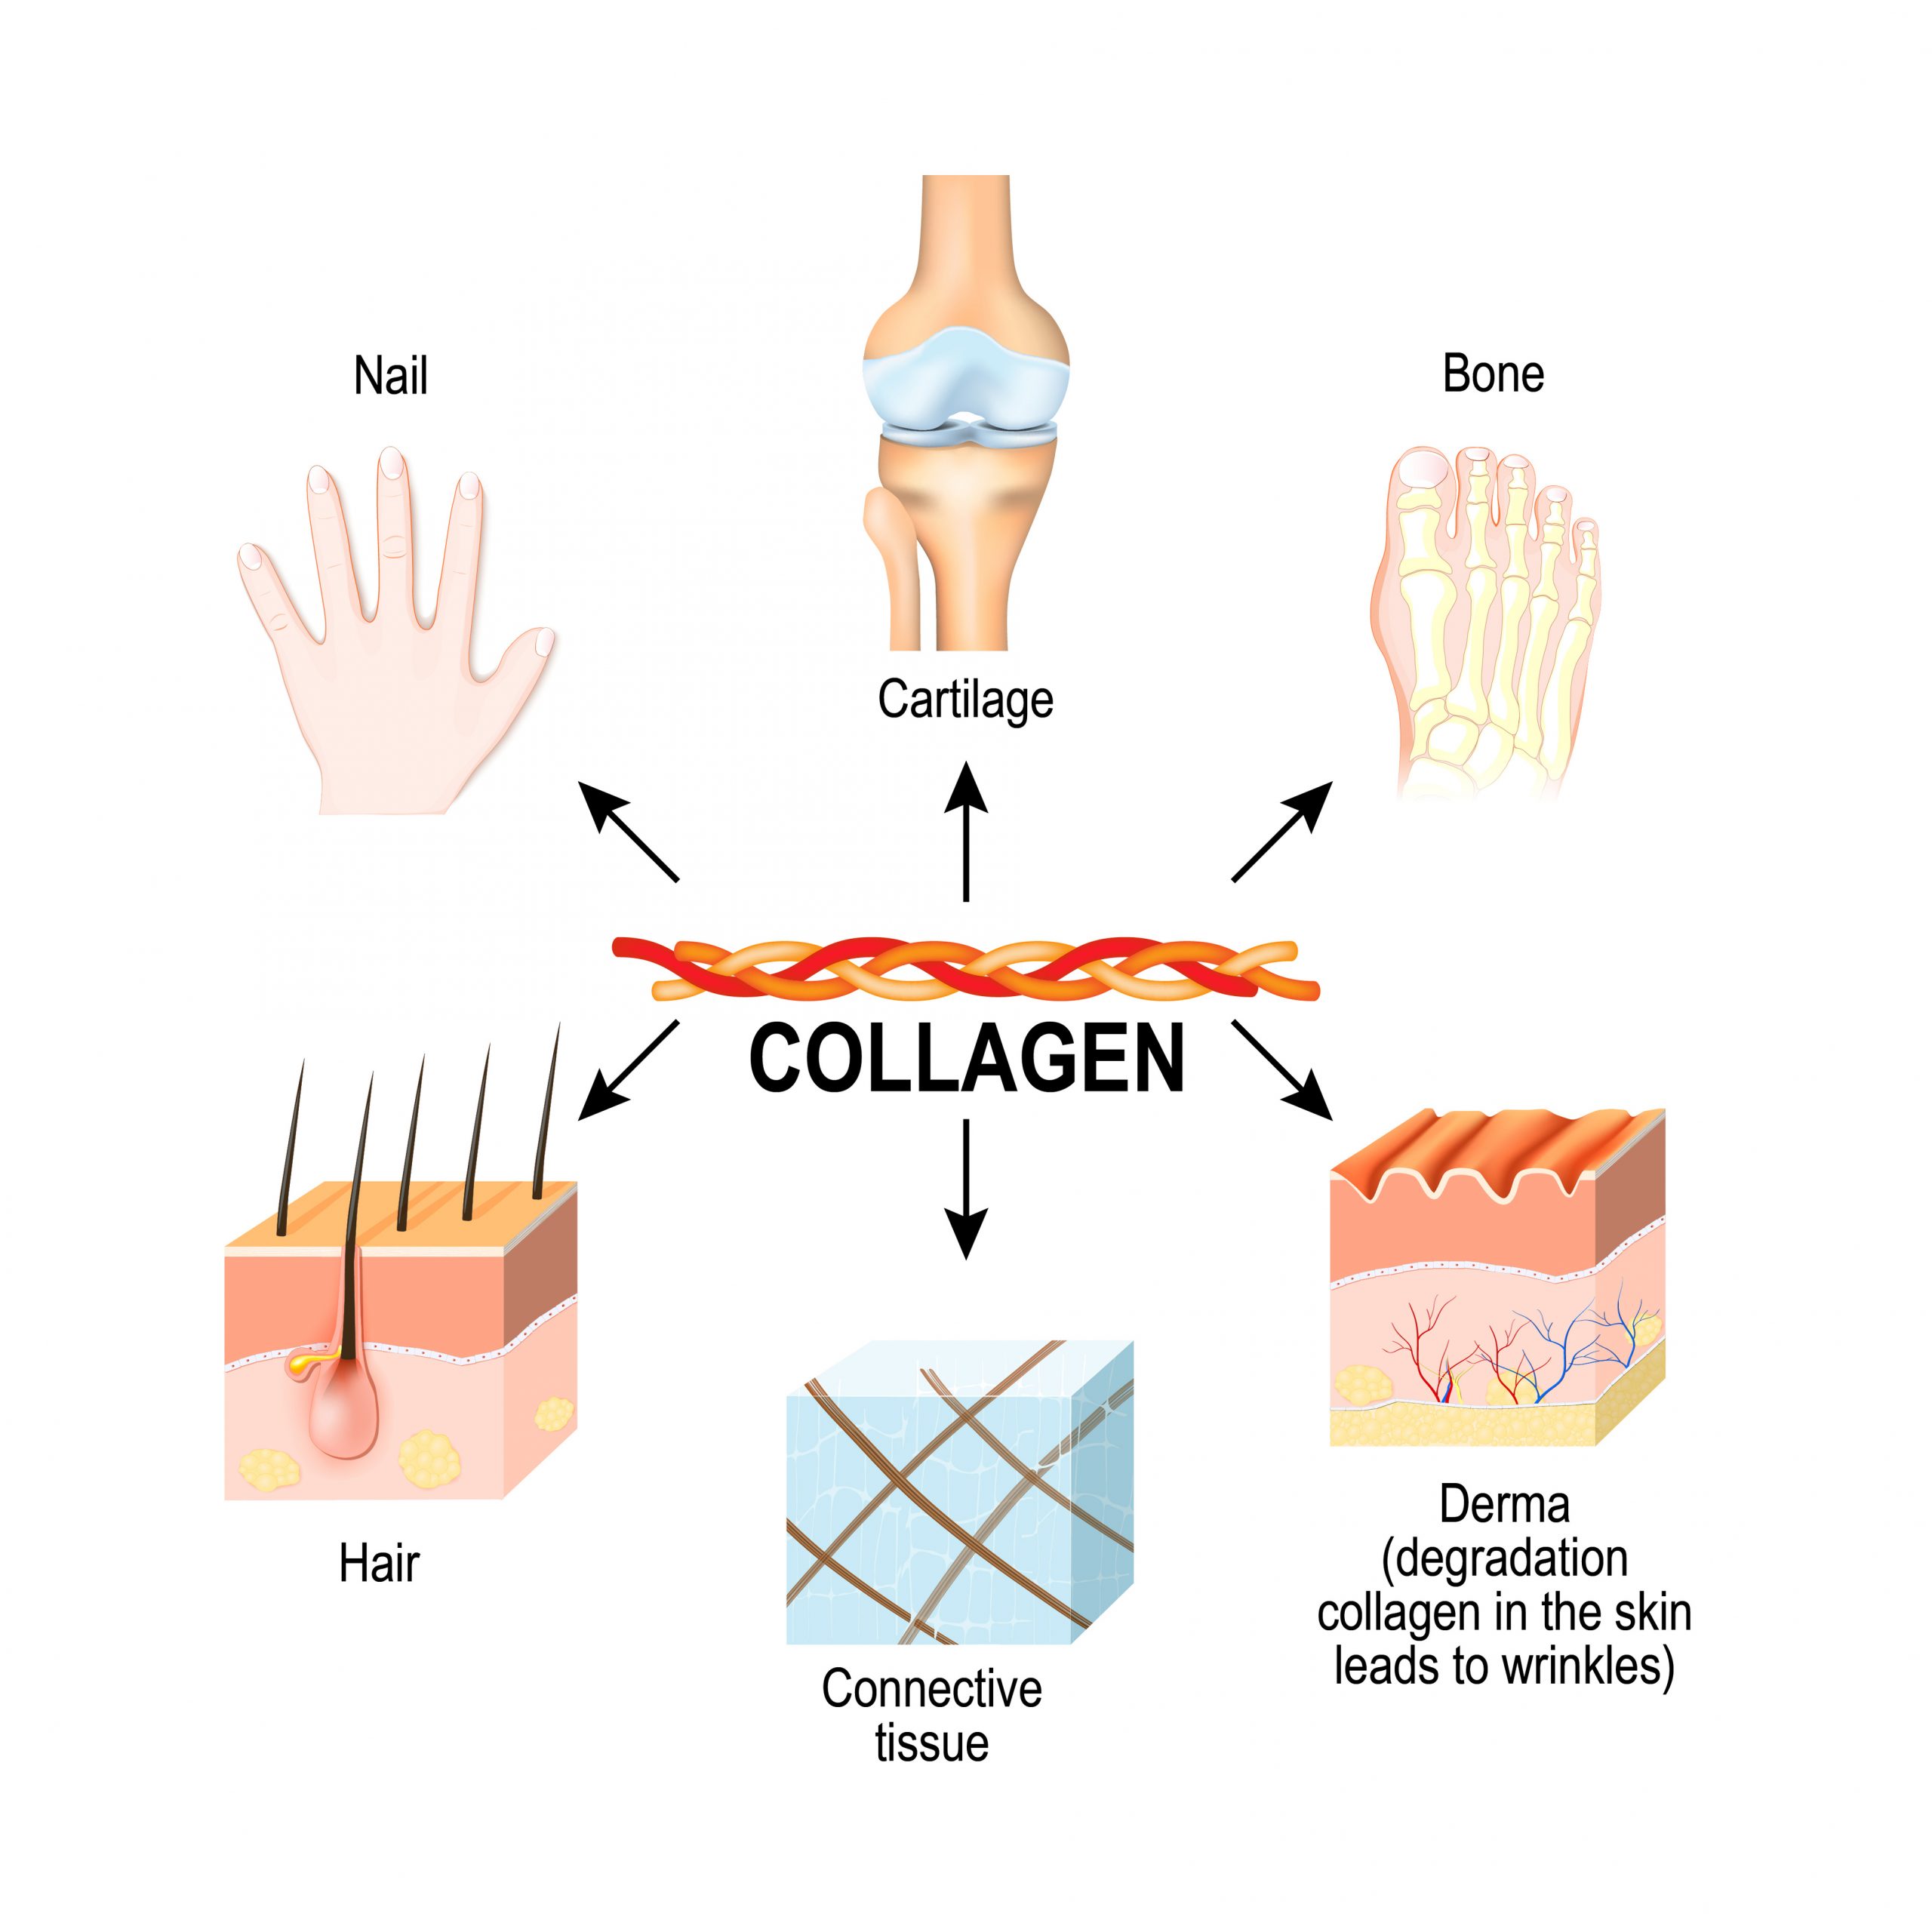 Collagen is the most abundant structural protein in the: connective tissues, cartilages, bones, nails, skin dermis, and hair.